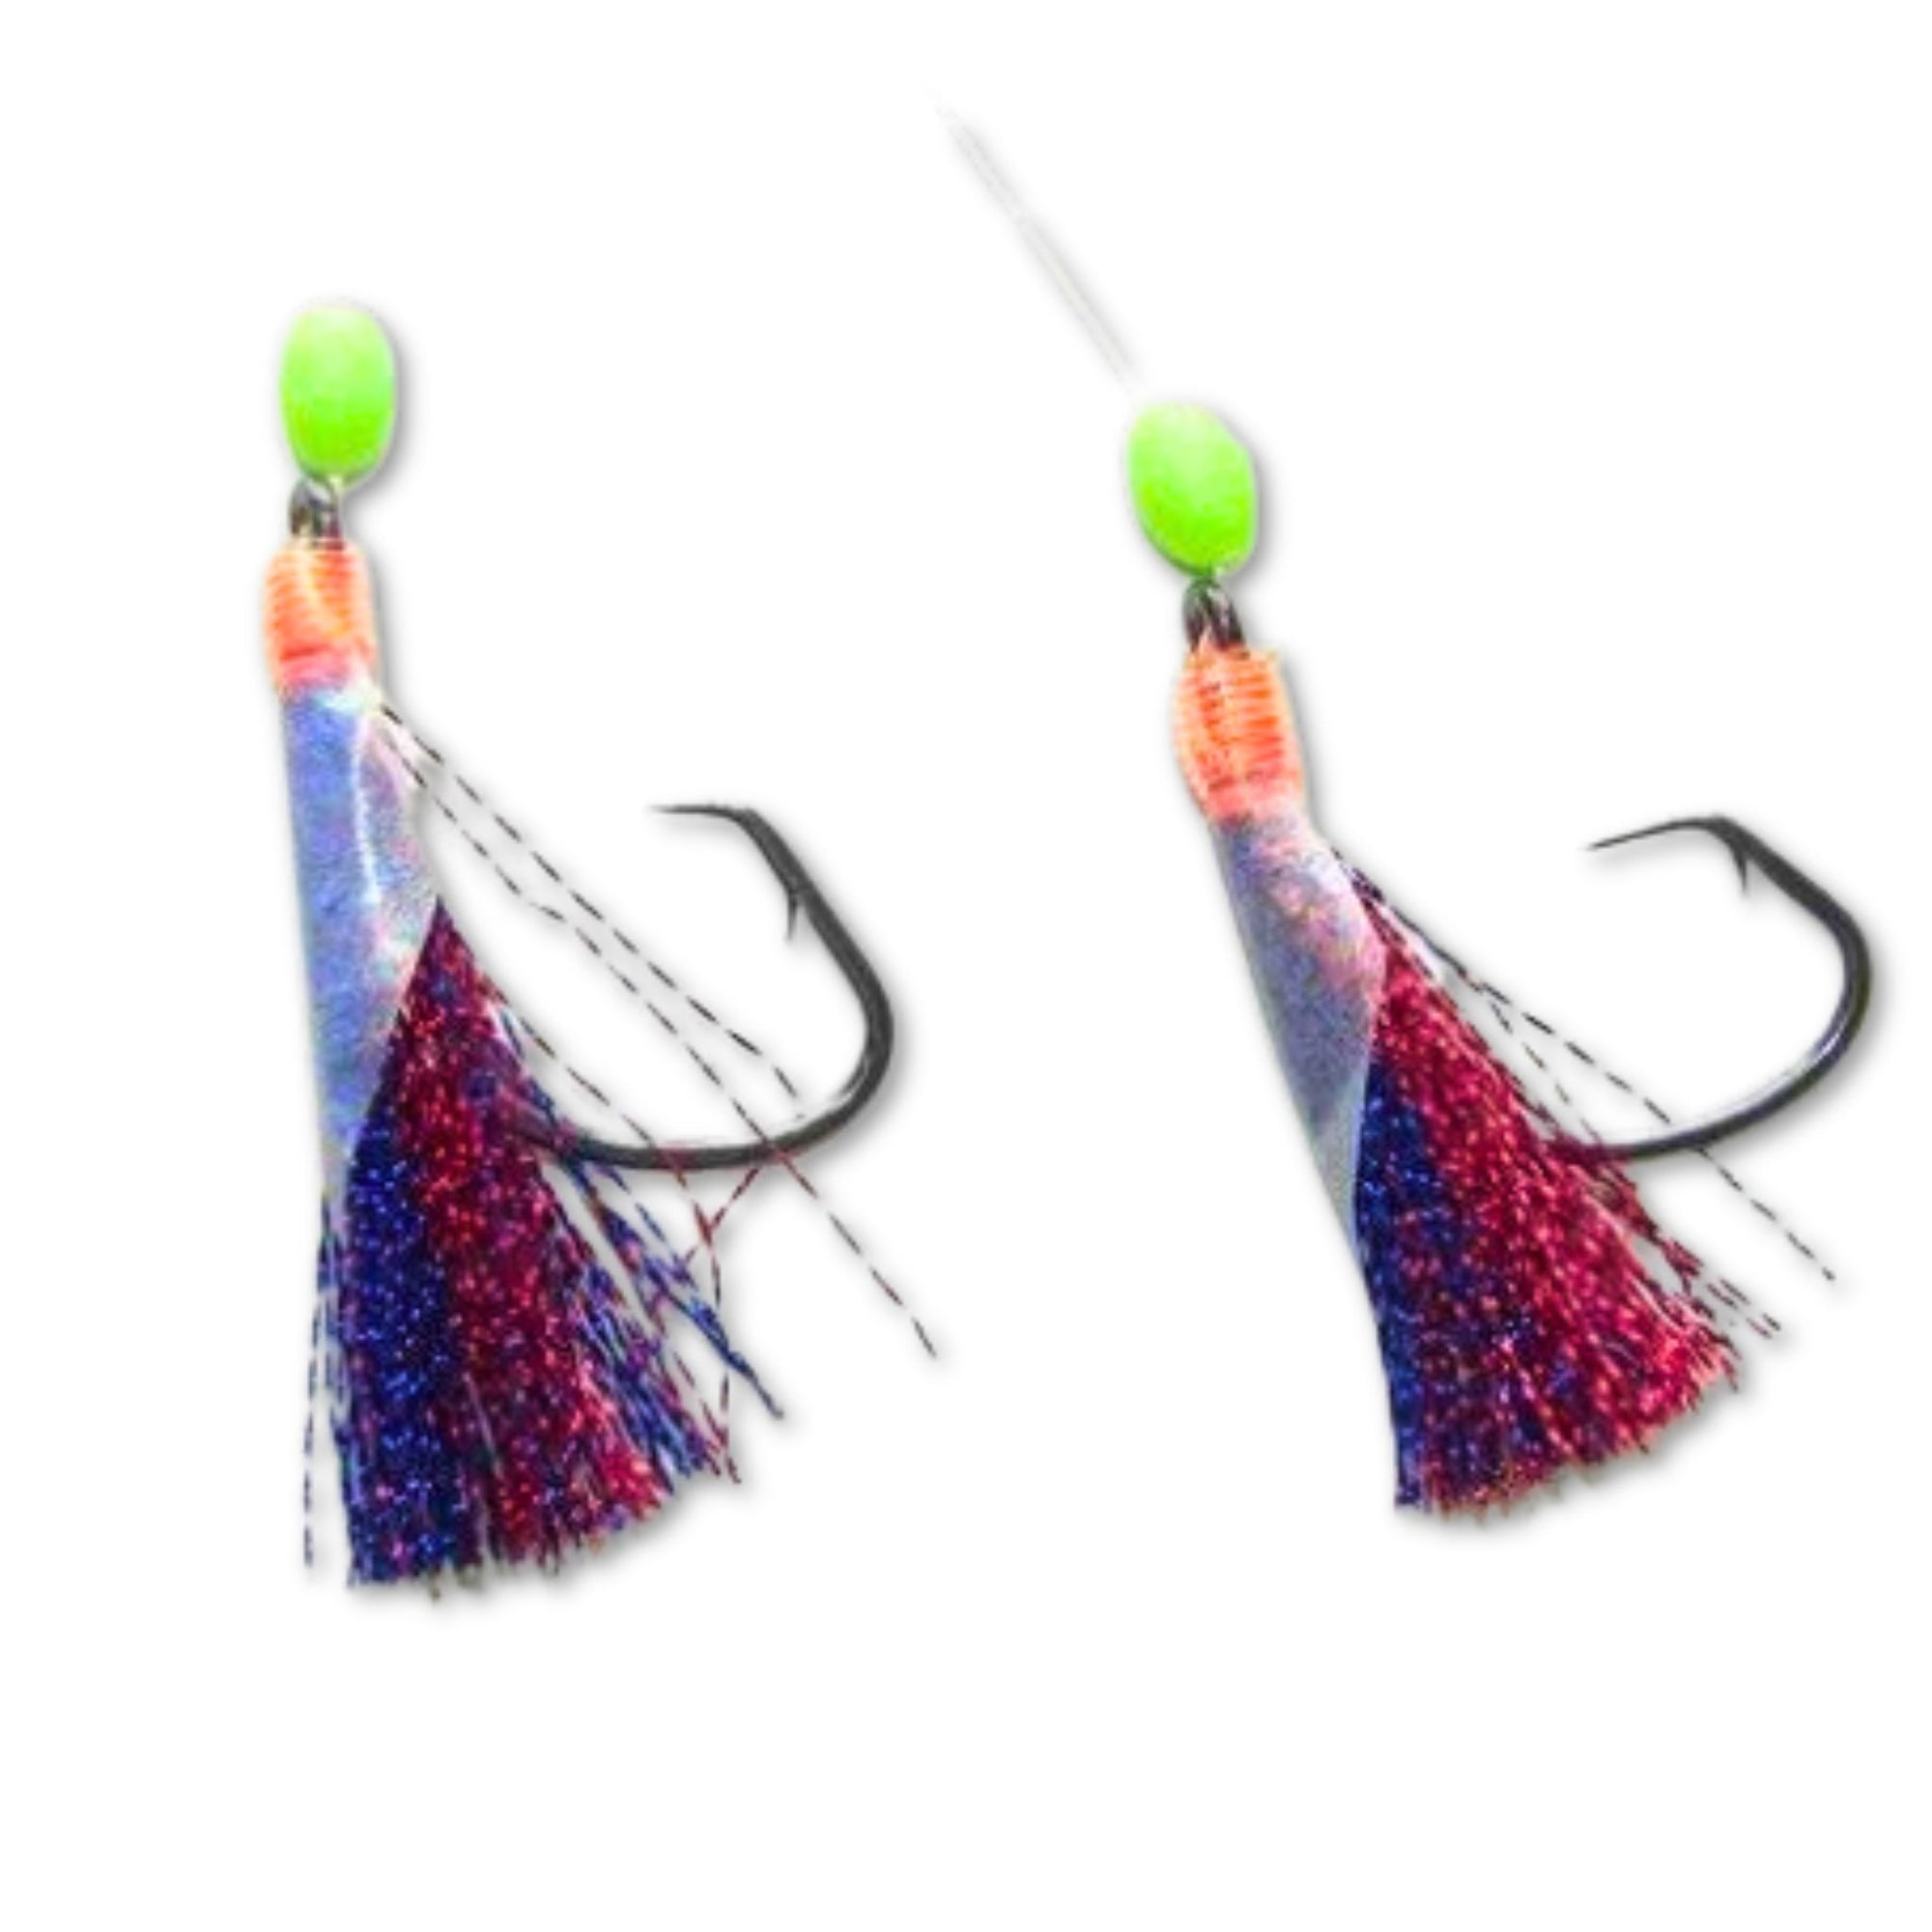 Snapper Mates Paternoster Rig 5/0 Red/Blue 2 Rigs - South East Clearance Centre